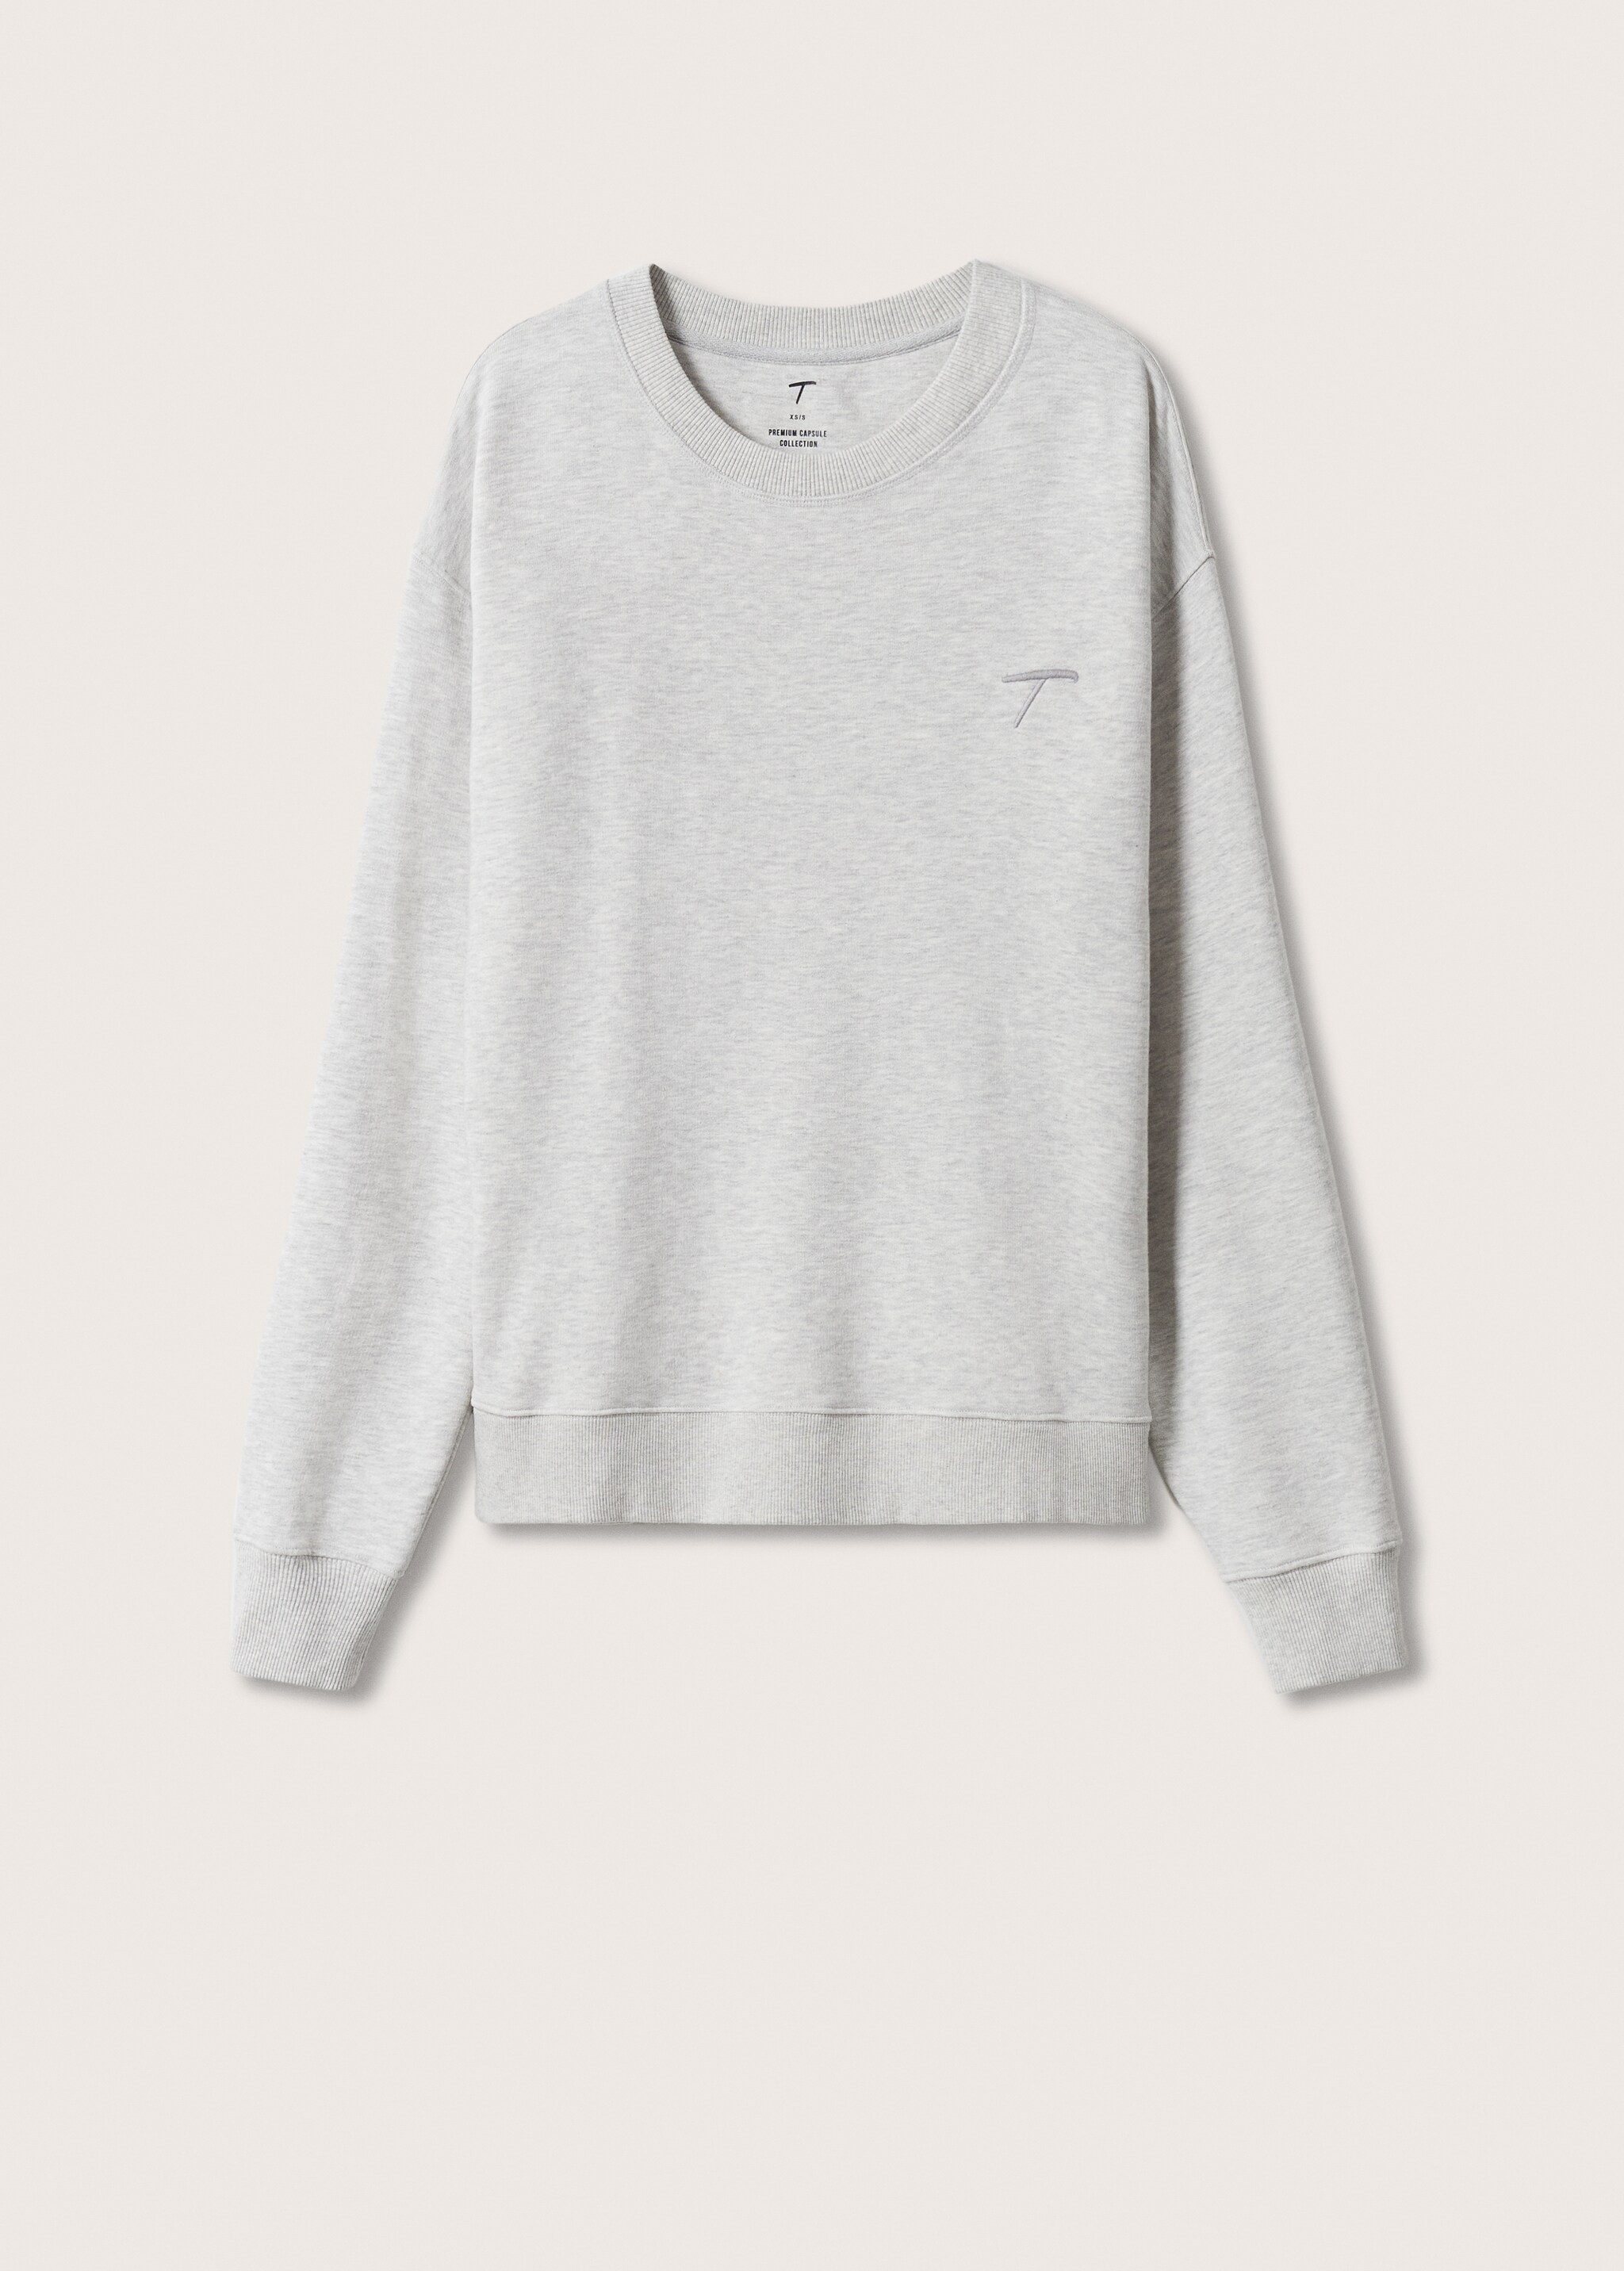 T Collection unisex sweatshirt  - Article without model